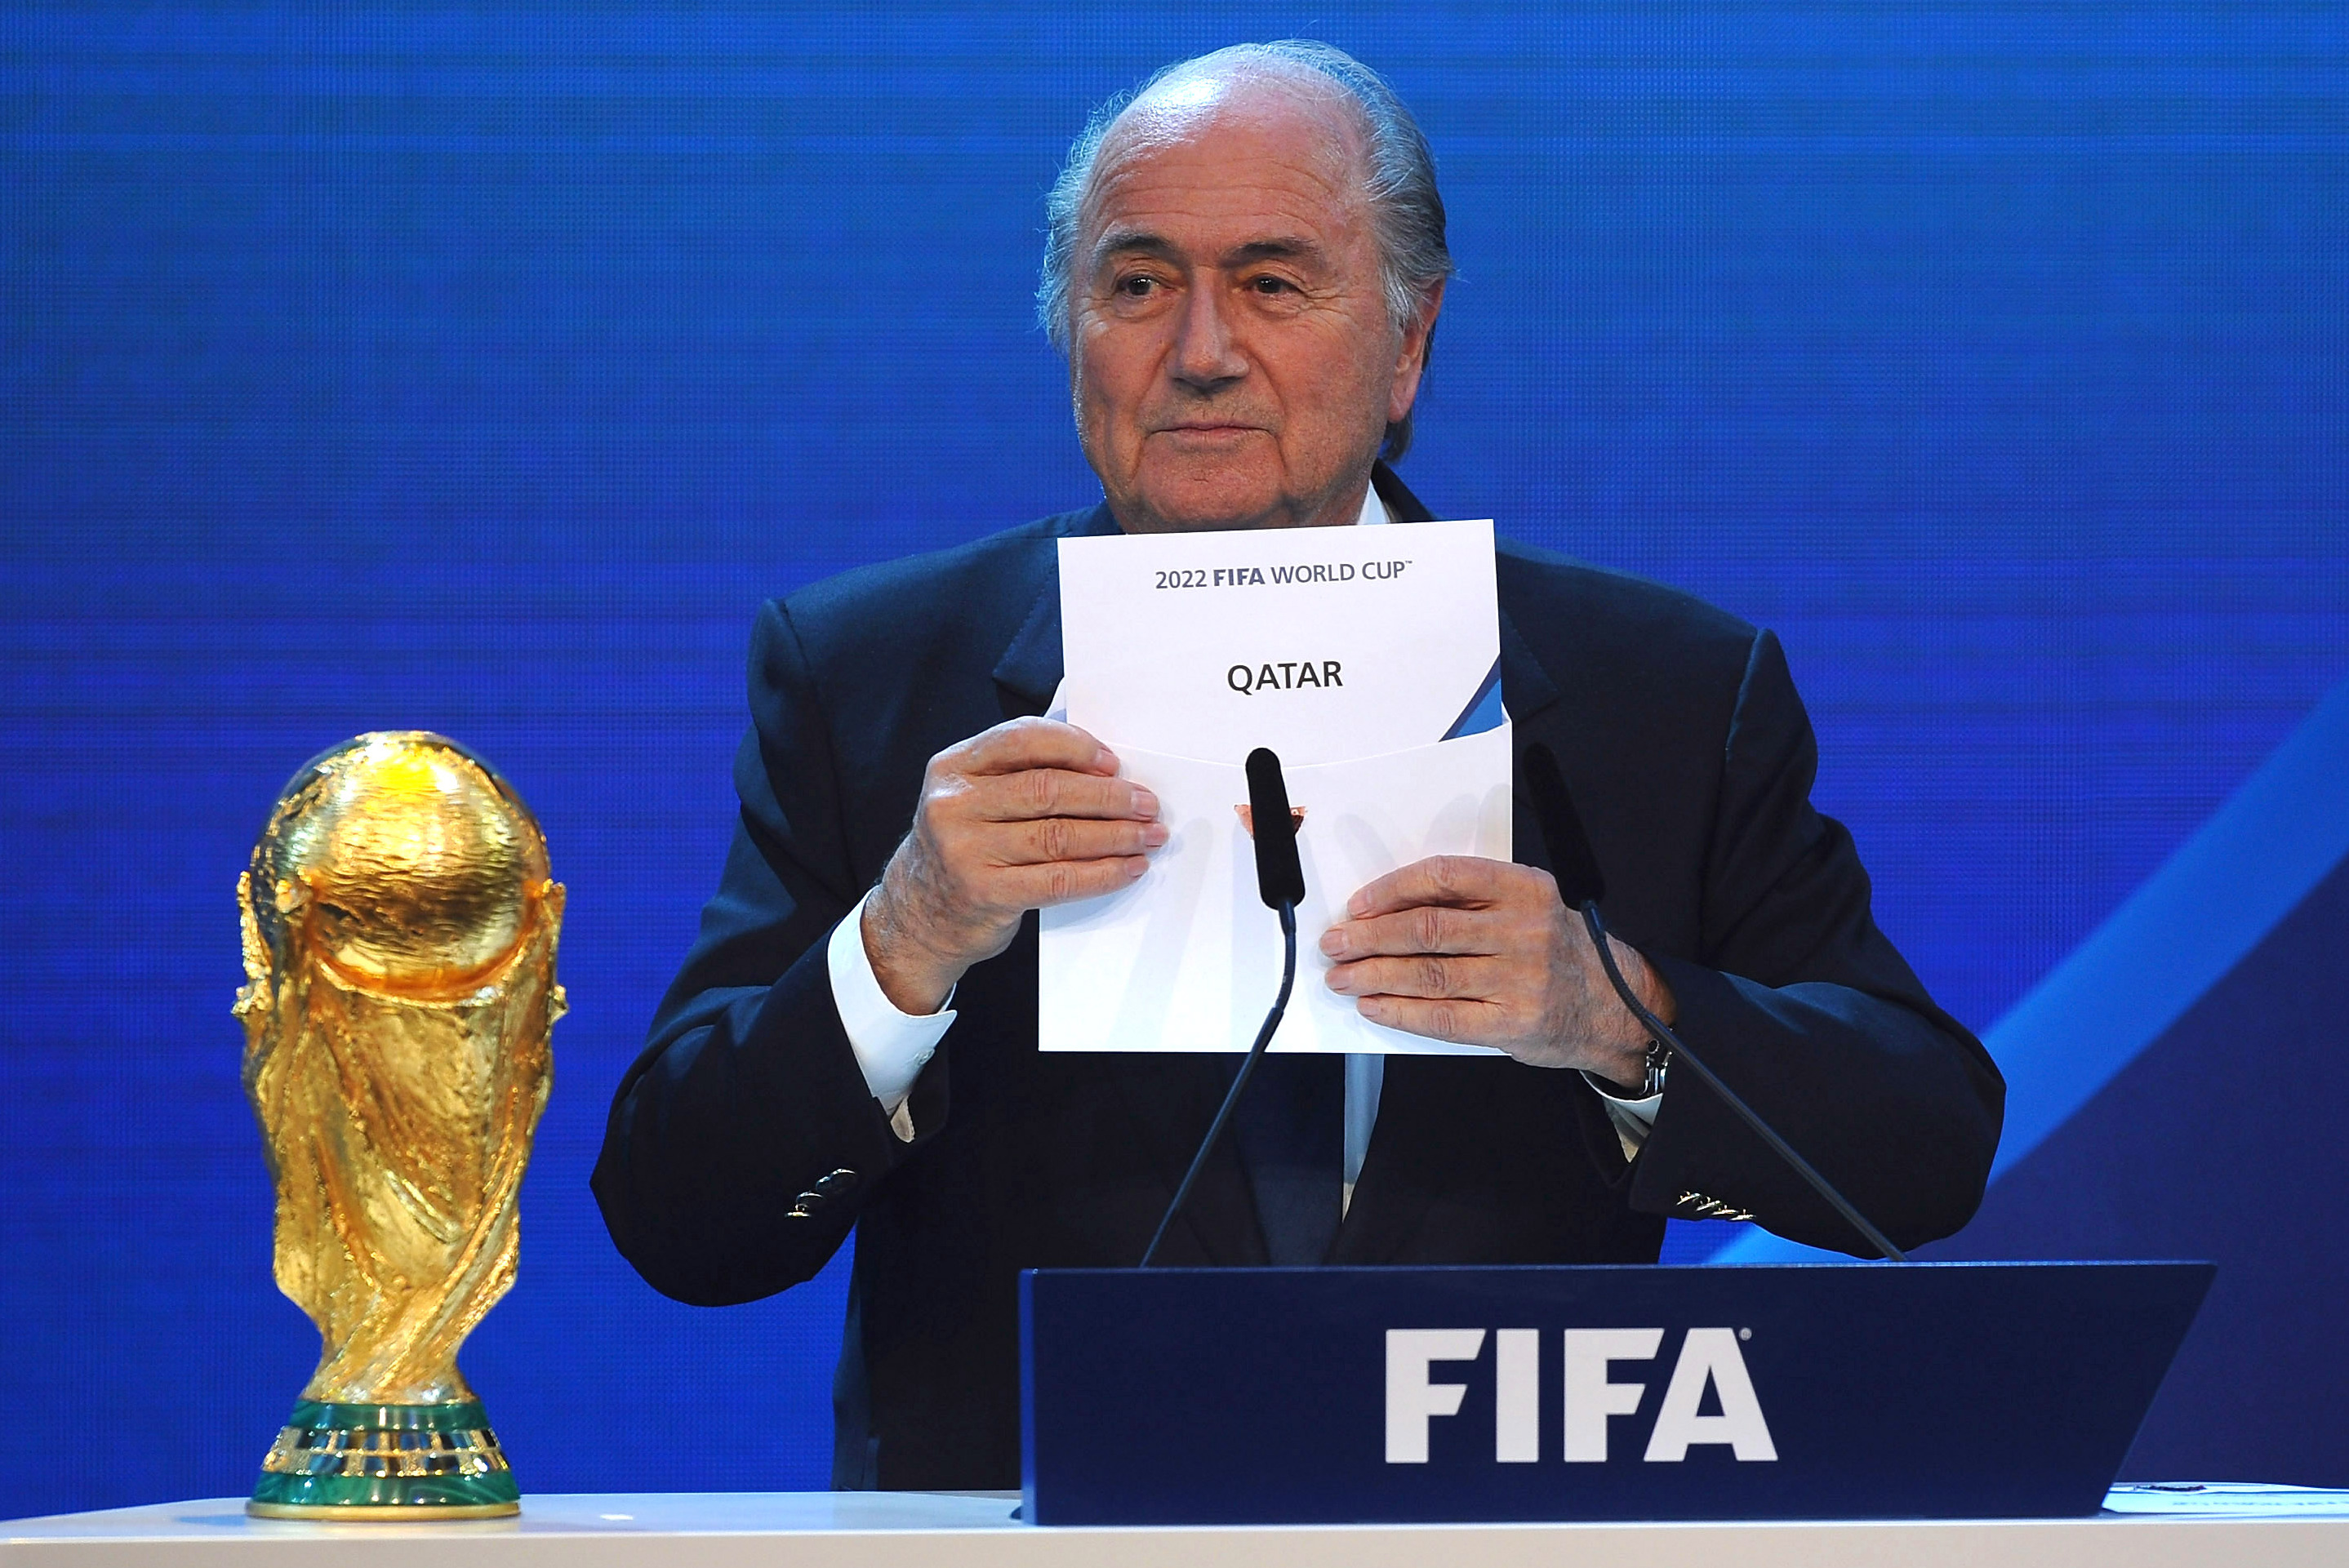 After Qatar 2022 where do Arab teams stand in FIFA rankings?